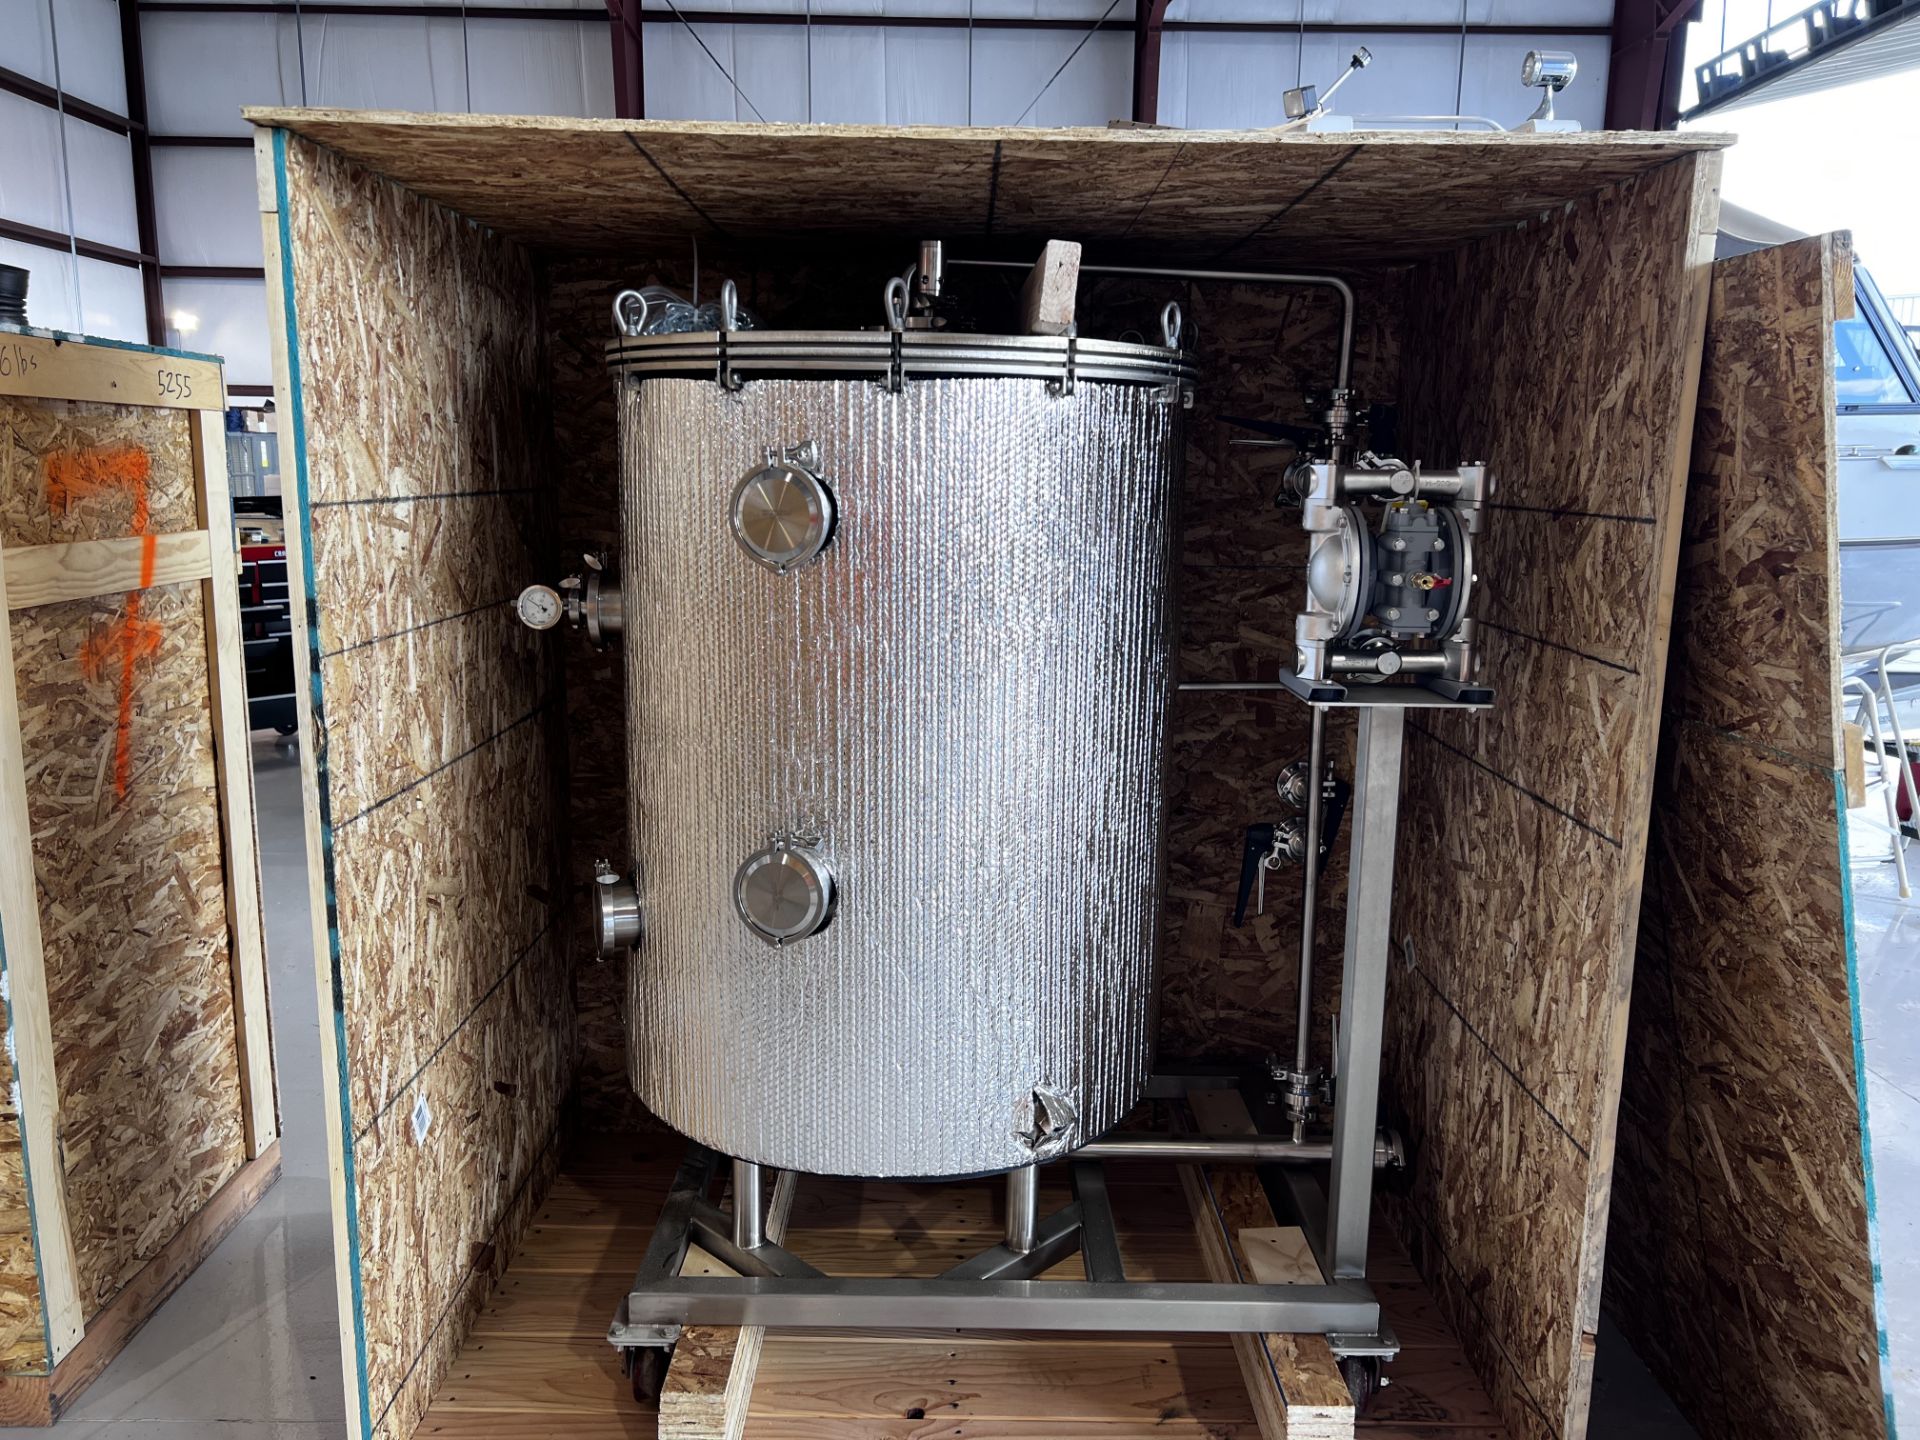 New/Unused Eden Labs High Performance Integrated Extraction and Recovery Solution System